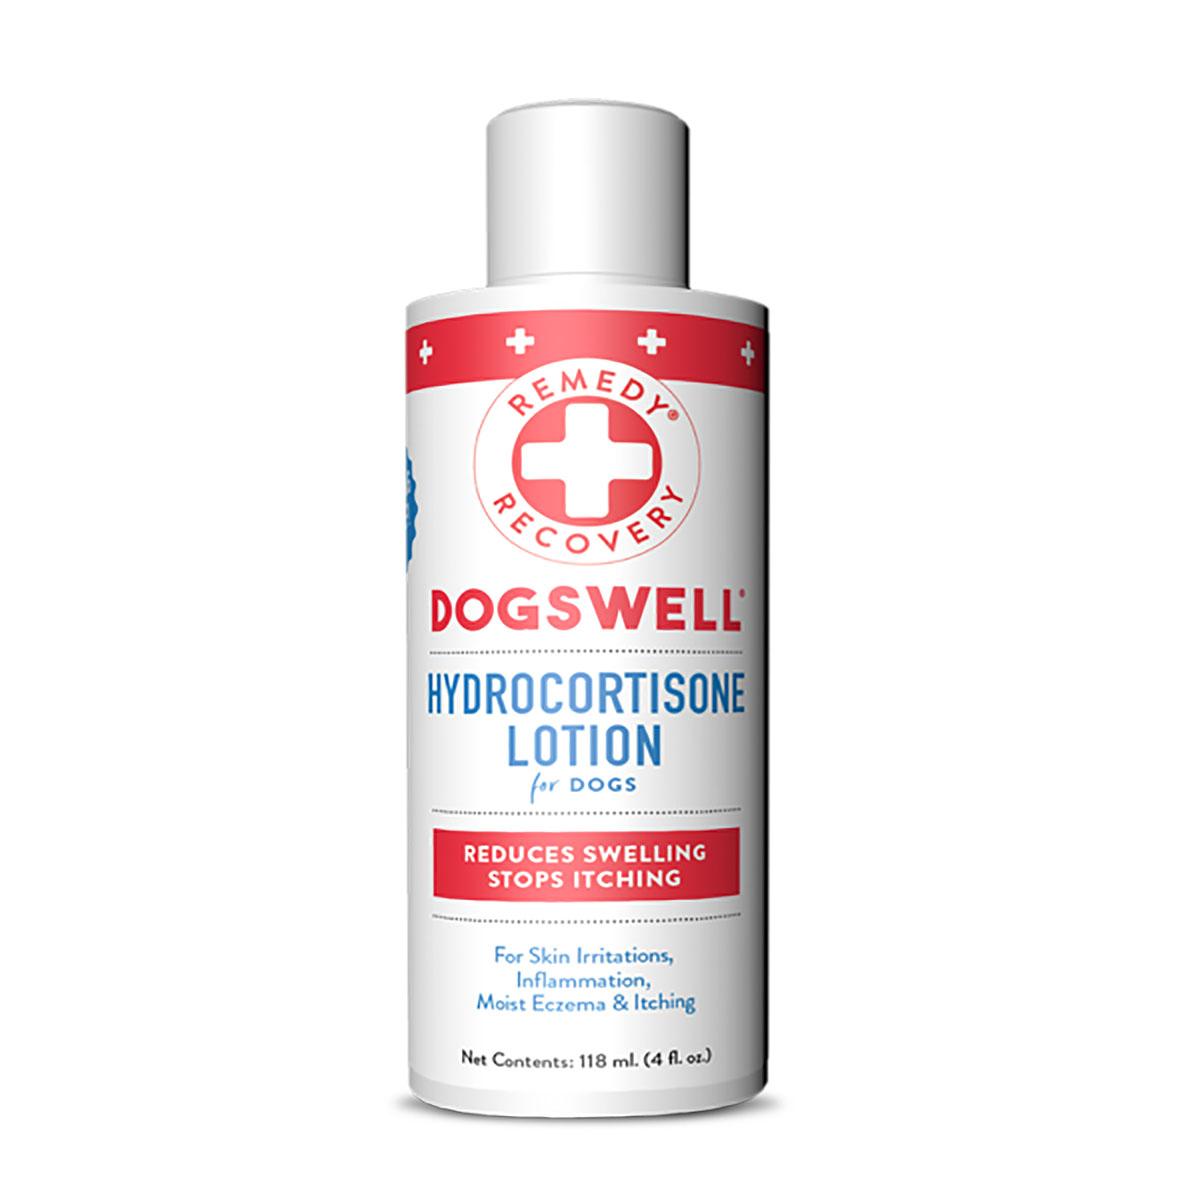 Dogswell Remedy + Recovery Hydrocortisone Lotion .05% For Dogs & Cats